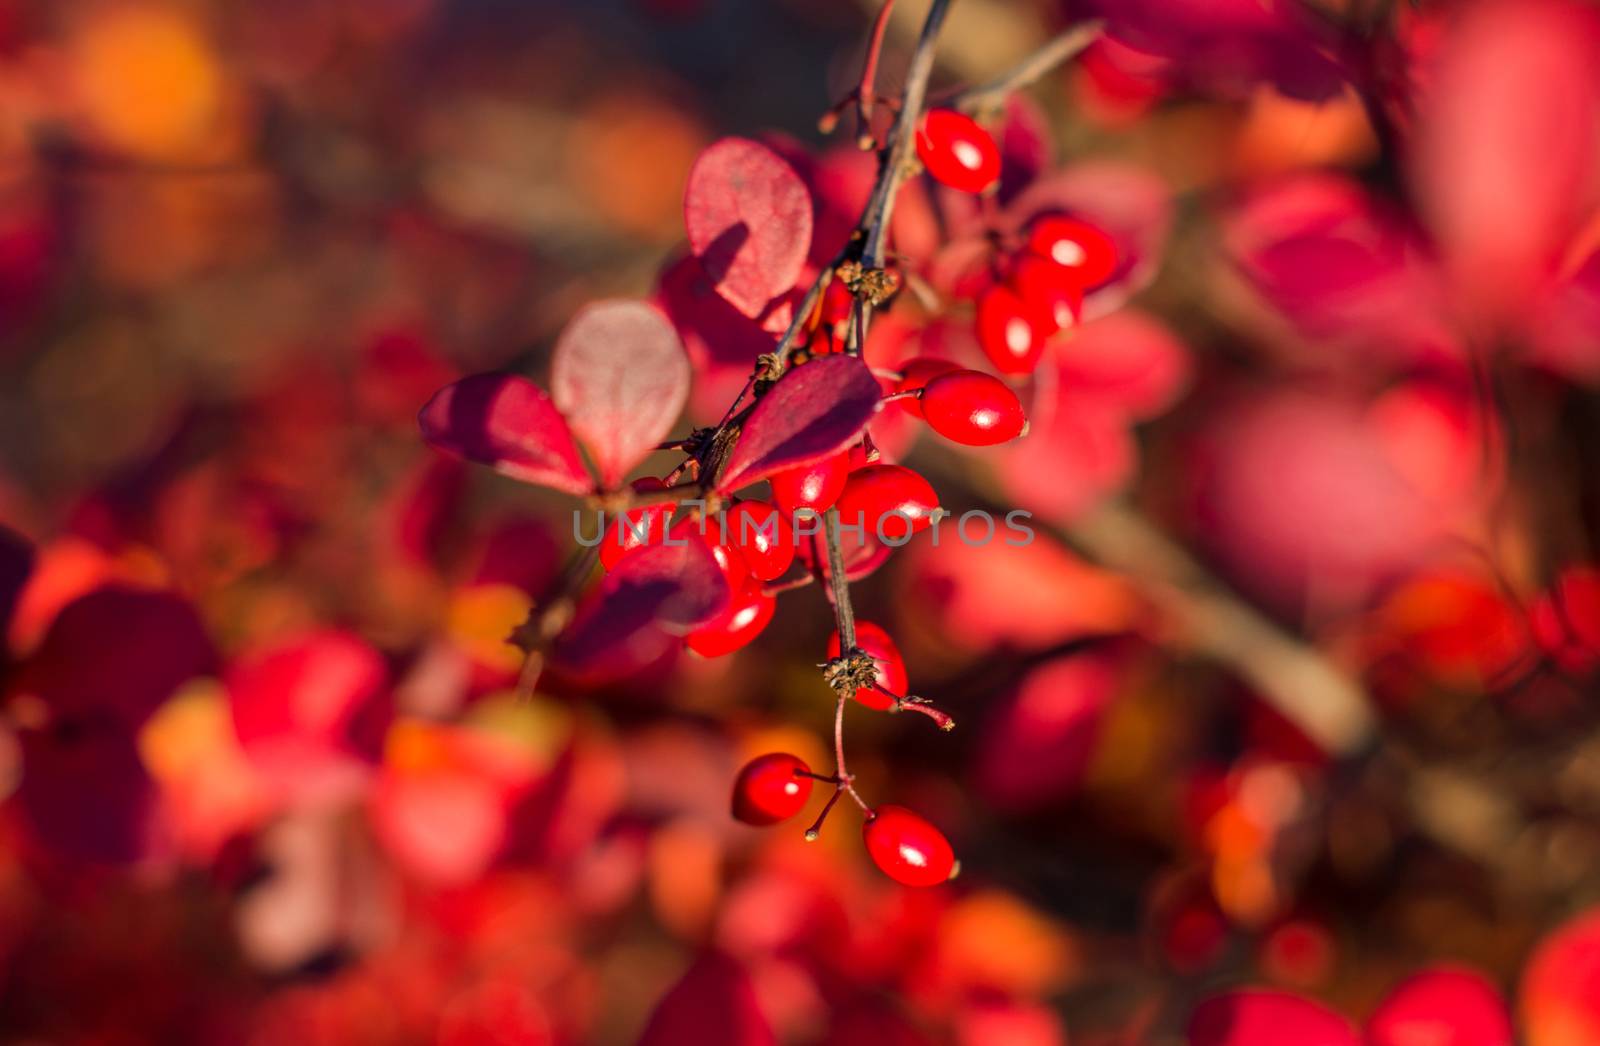 A branch of the ripe berries of barberry. For your commercial and editorial use.